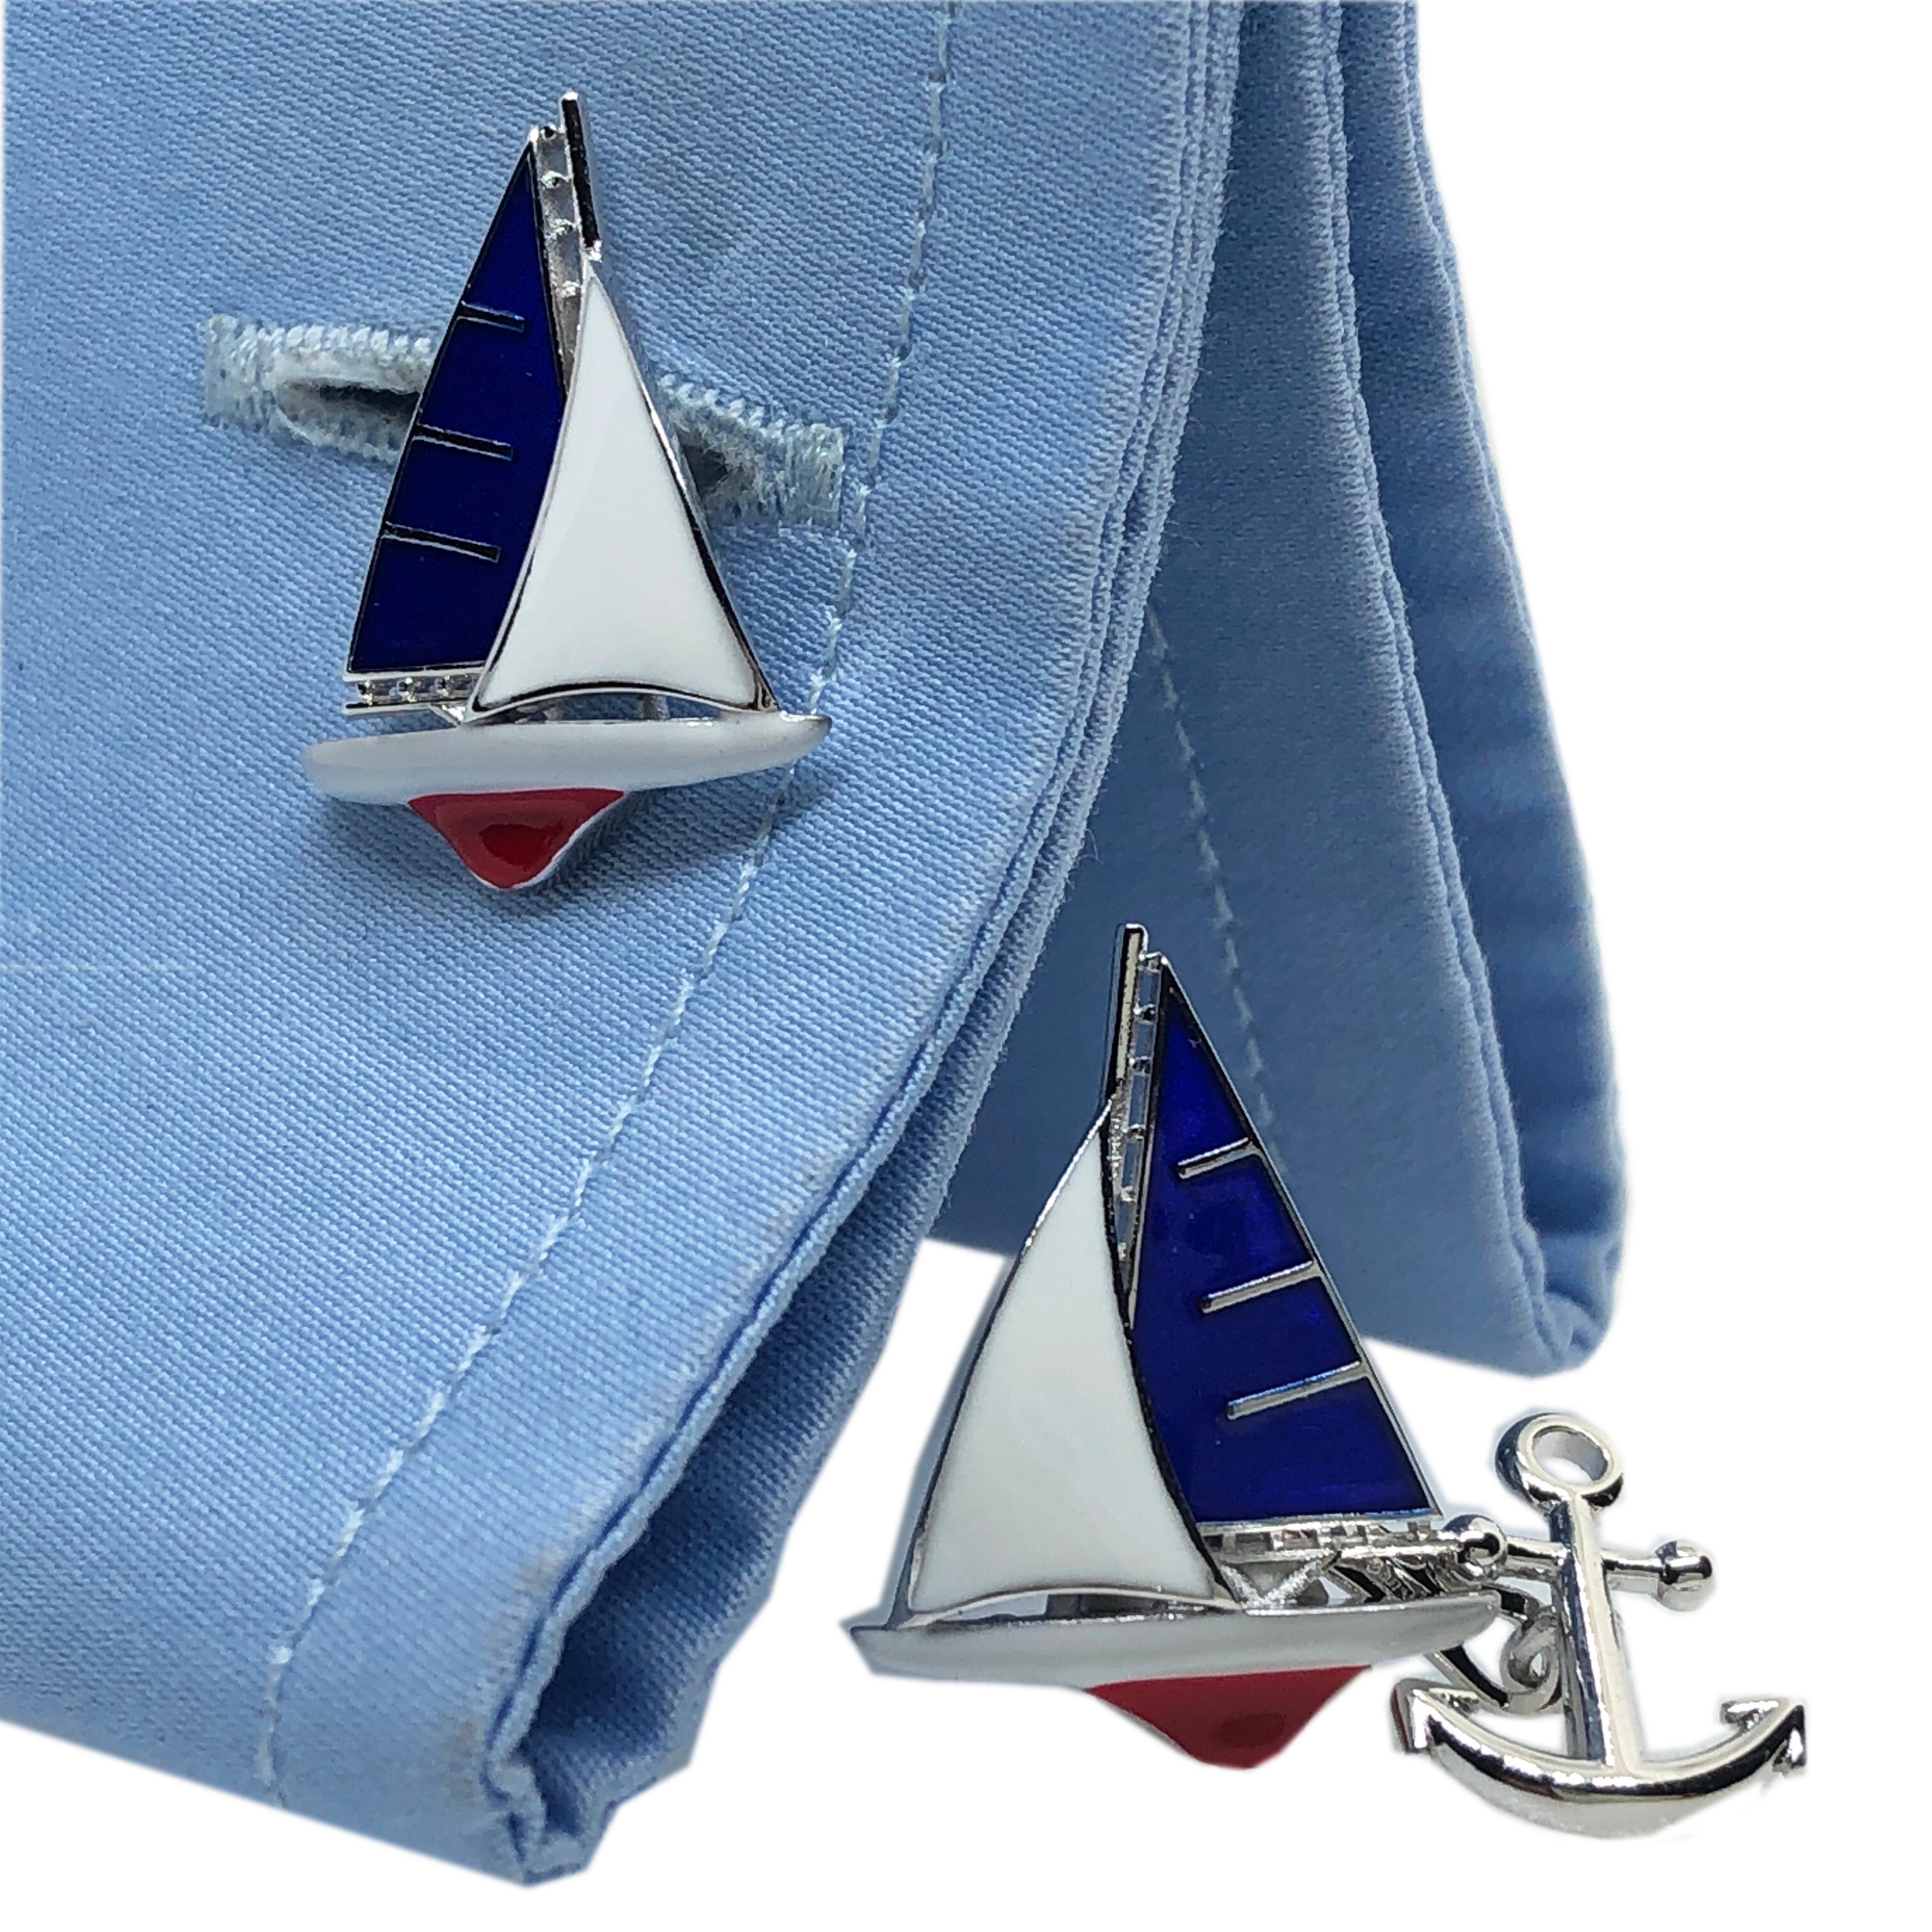 Berca Blue White Red Sailing Boat Little Anchor Back Sterling Silver Cufflinks 4